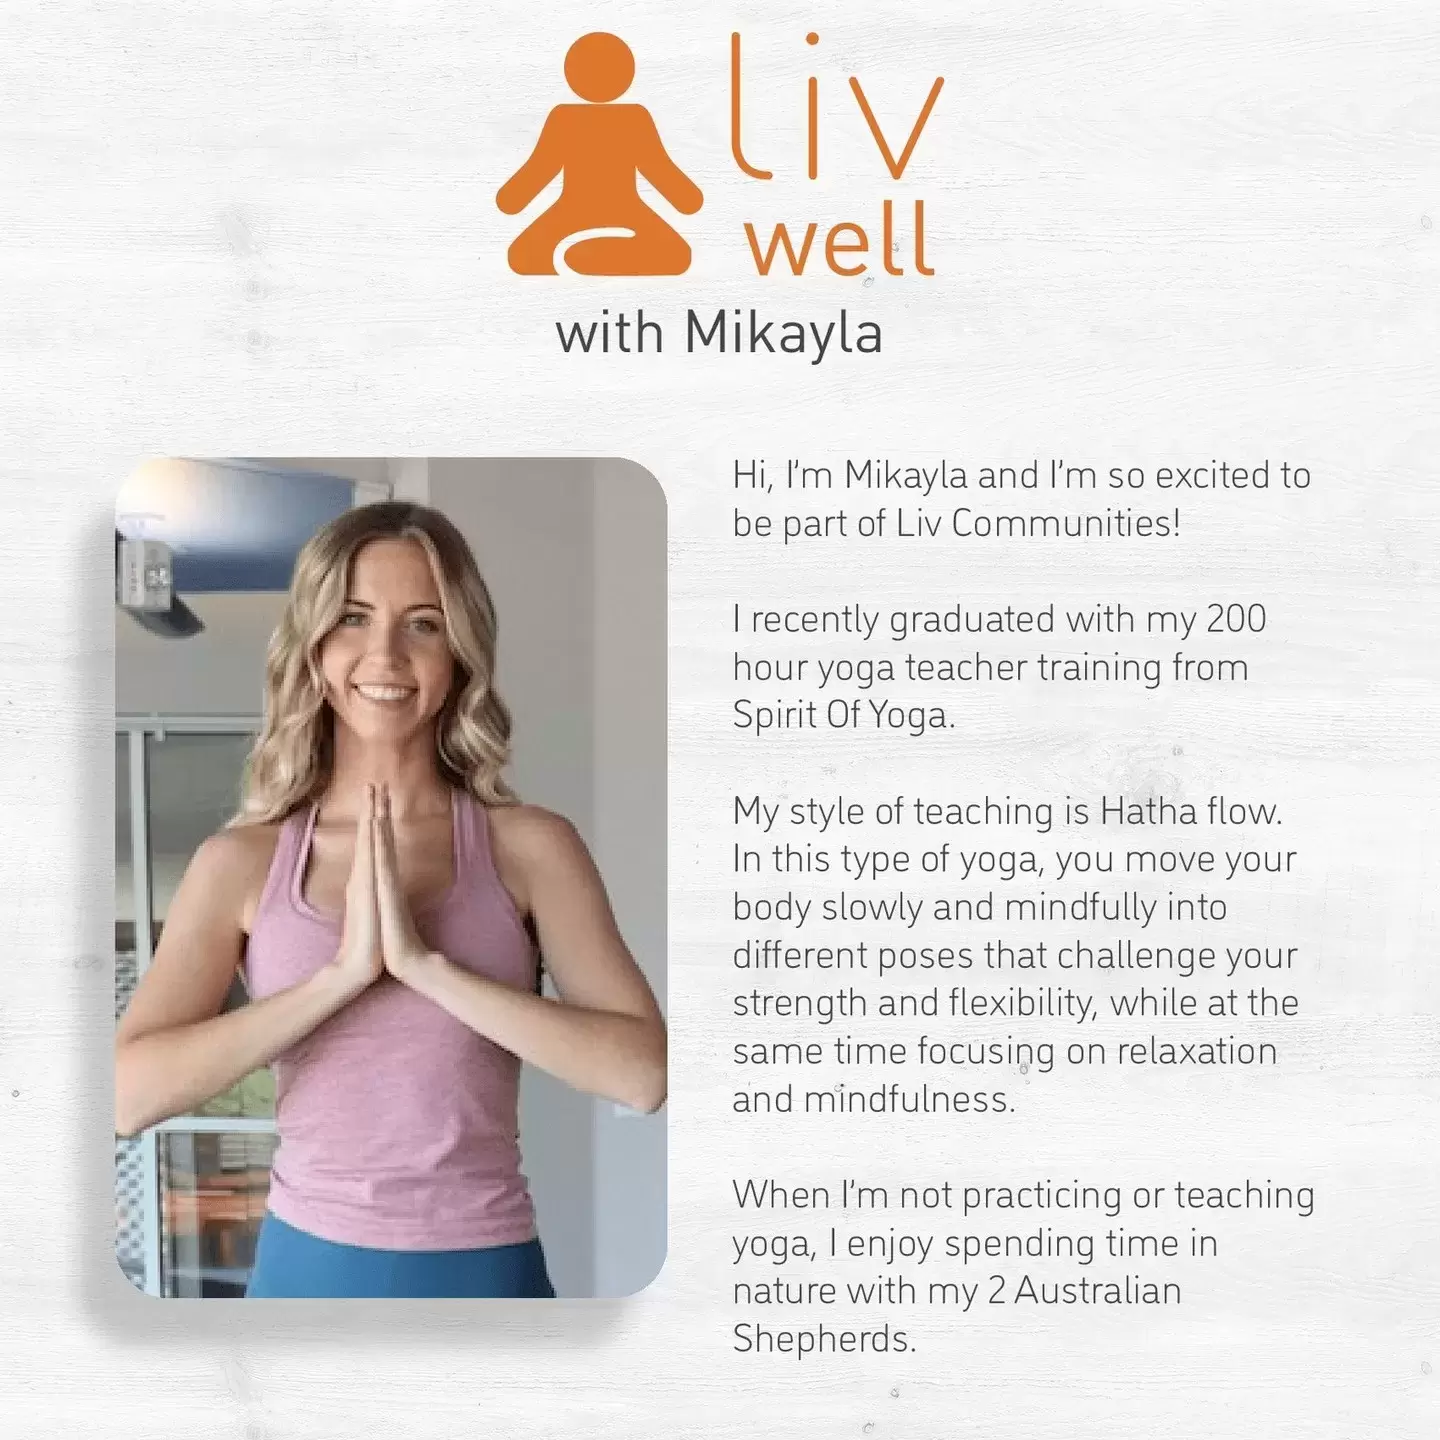 Did you hear the great news?! Yoga is back! 👏

Meet our newest Yoga instructor Mikayla, and join her every Tuesday at 6:30pm to relax and unwind your mind and body! 
.
.
.
#LivWell #LivConnected #LivFit #Yoga